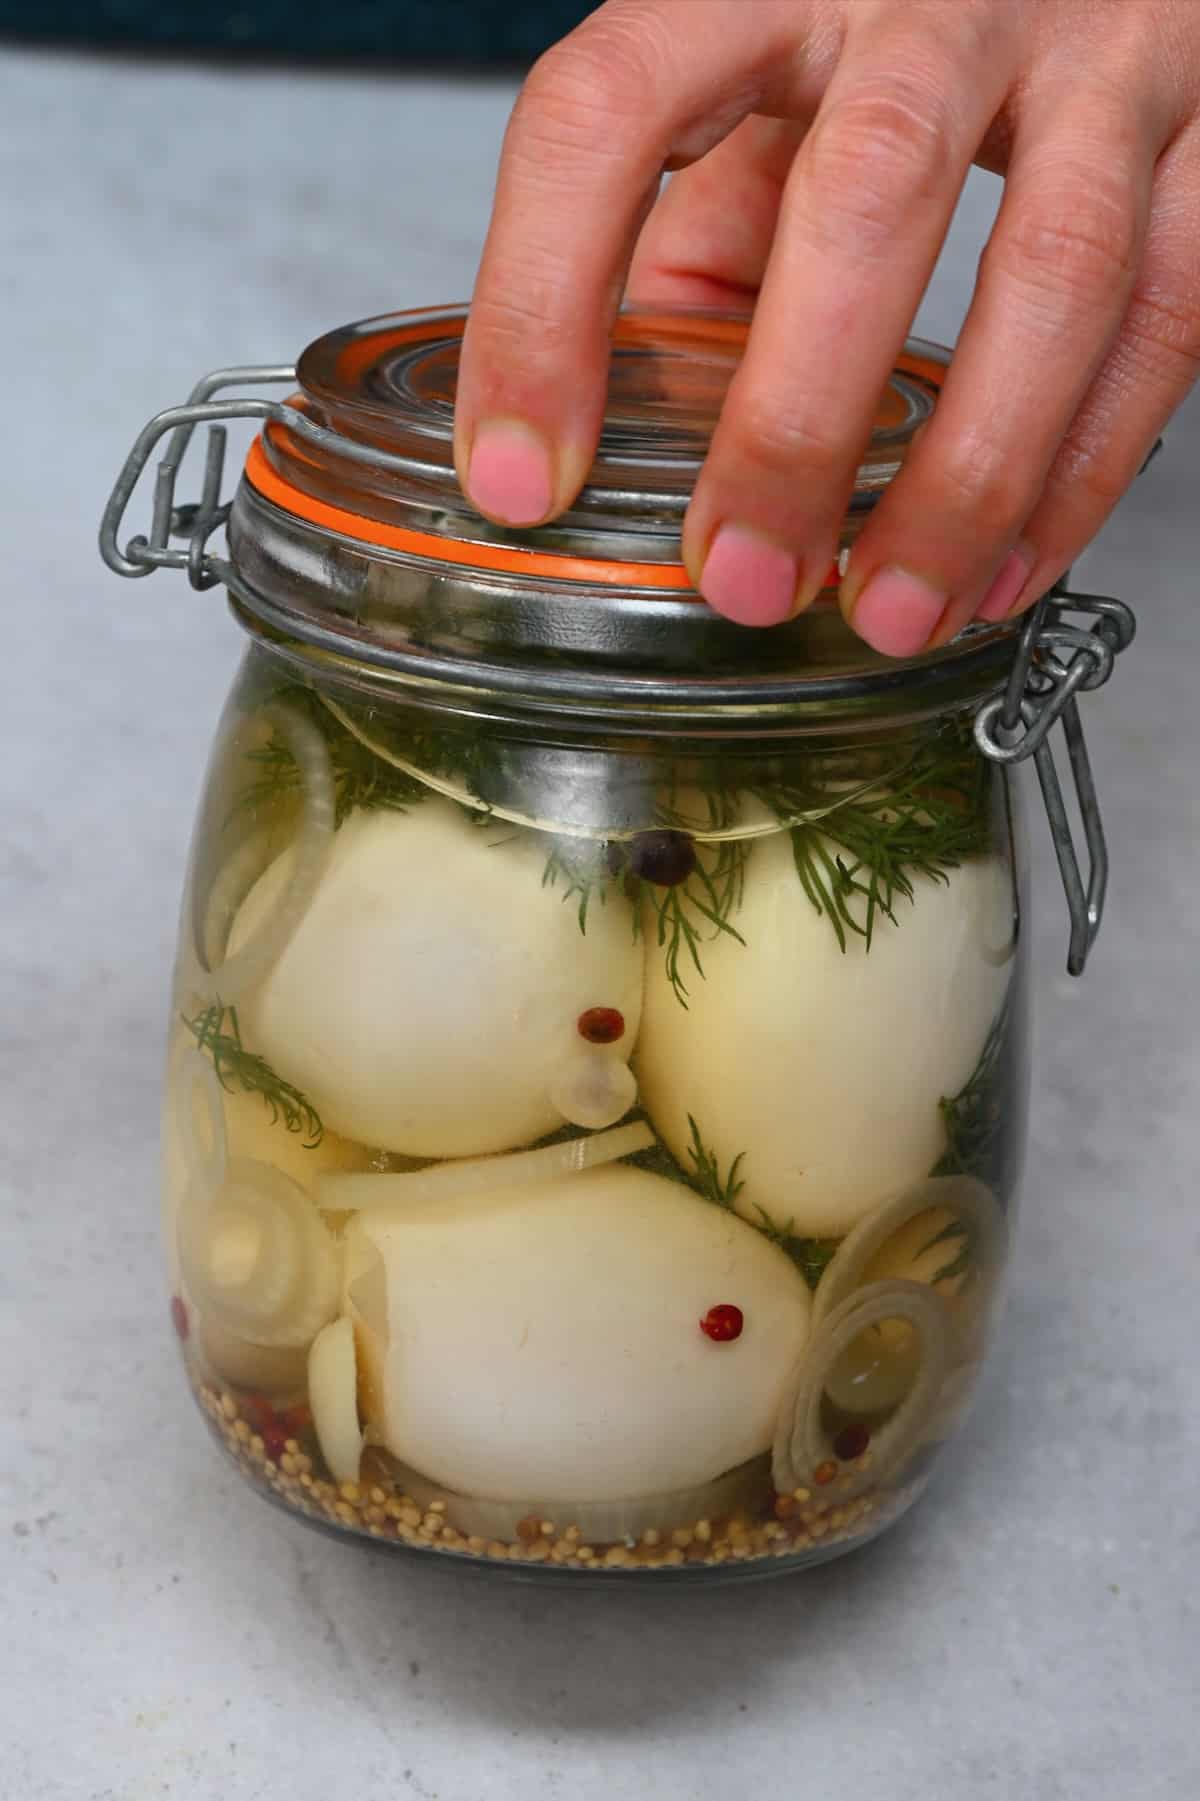 A jar with homemade pickled eggs